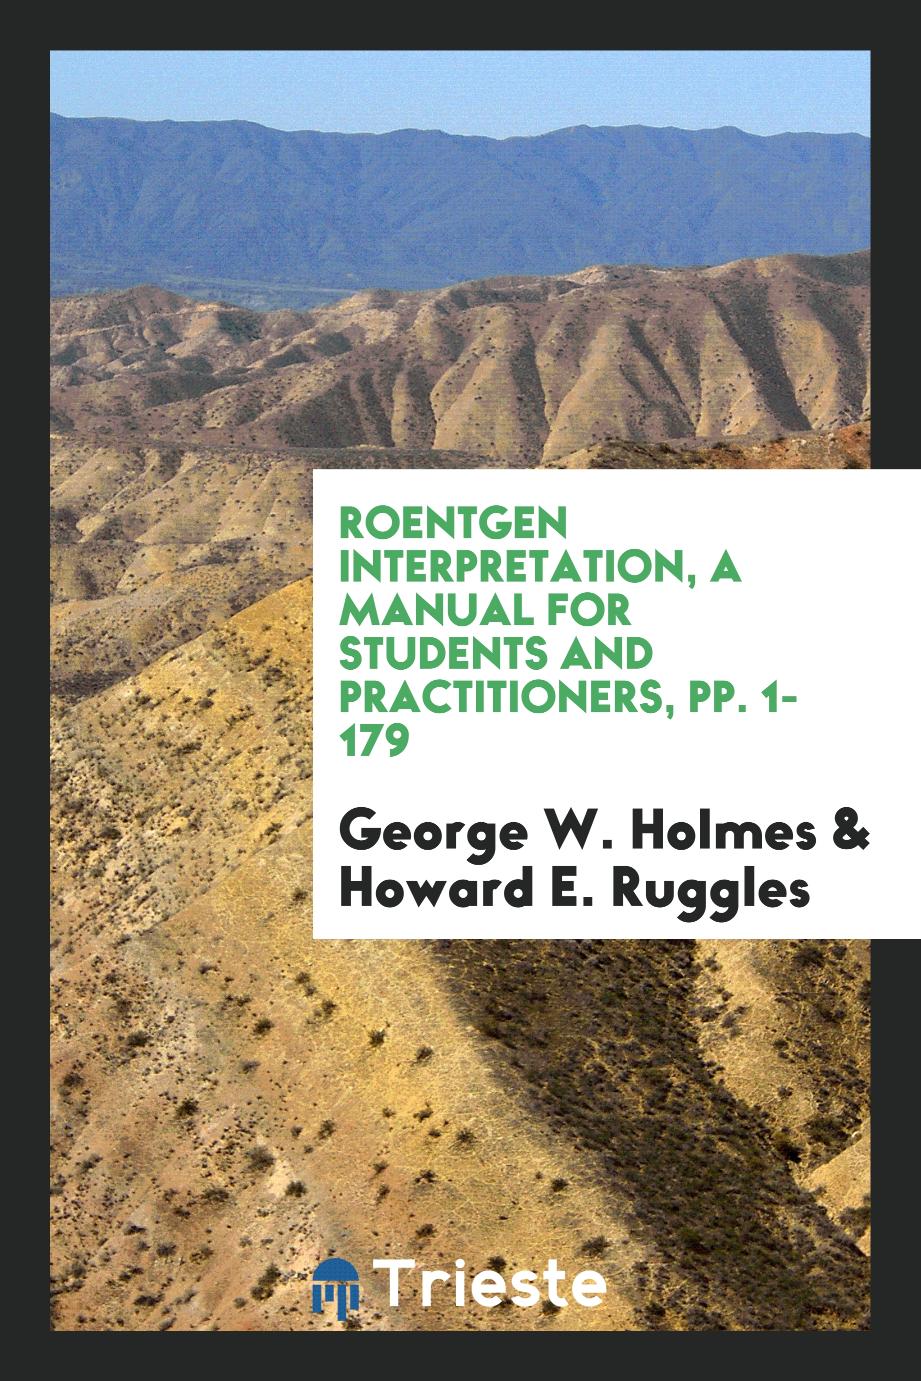 Roentgen Interpretation, a Manual for Students and Practitioners, pp. 1-179